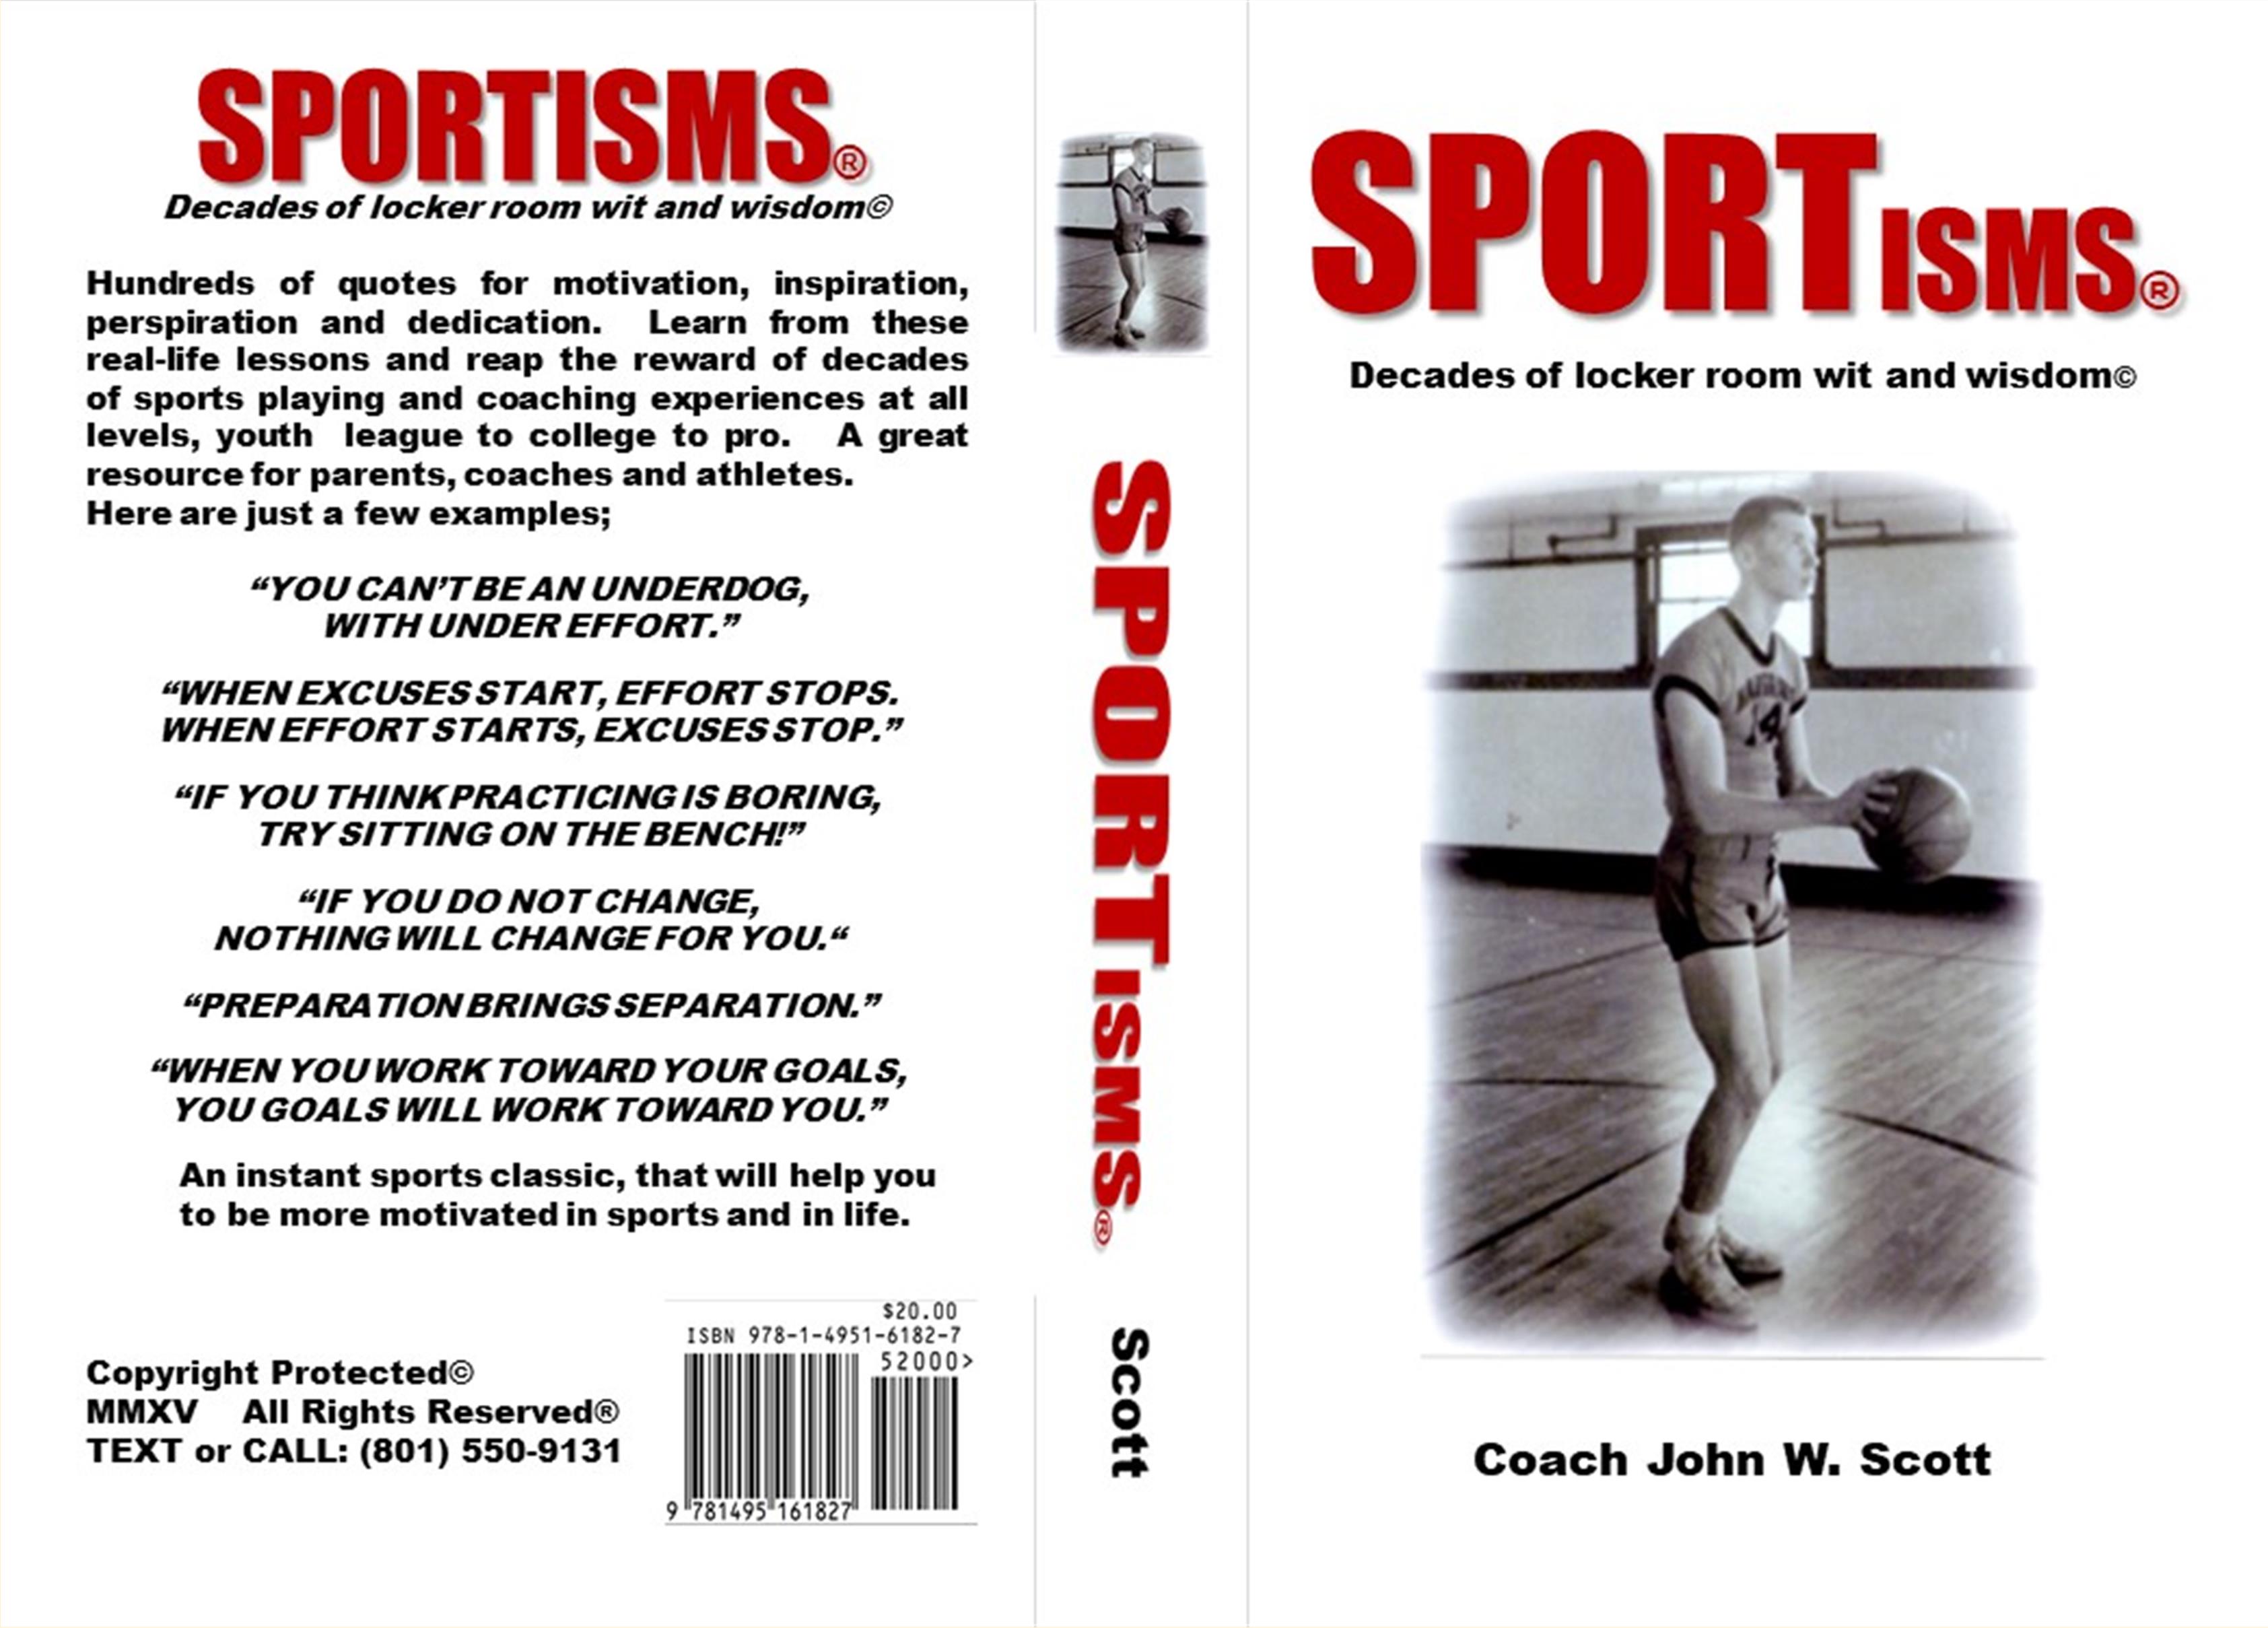 SPORTisms cover image